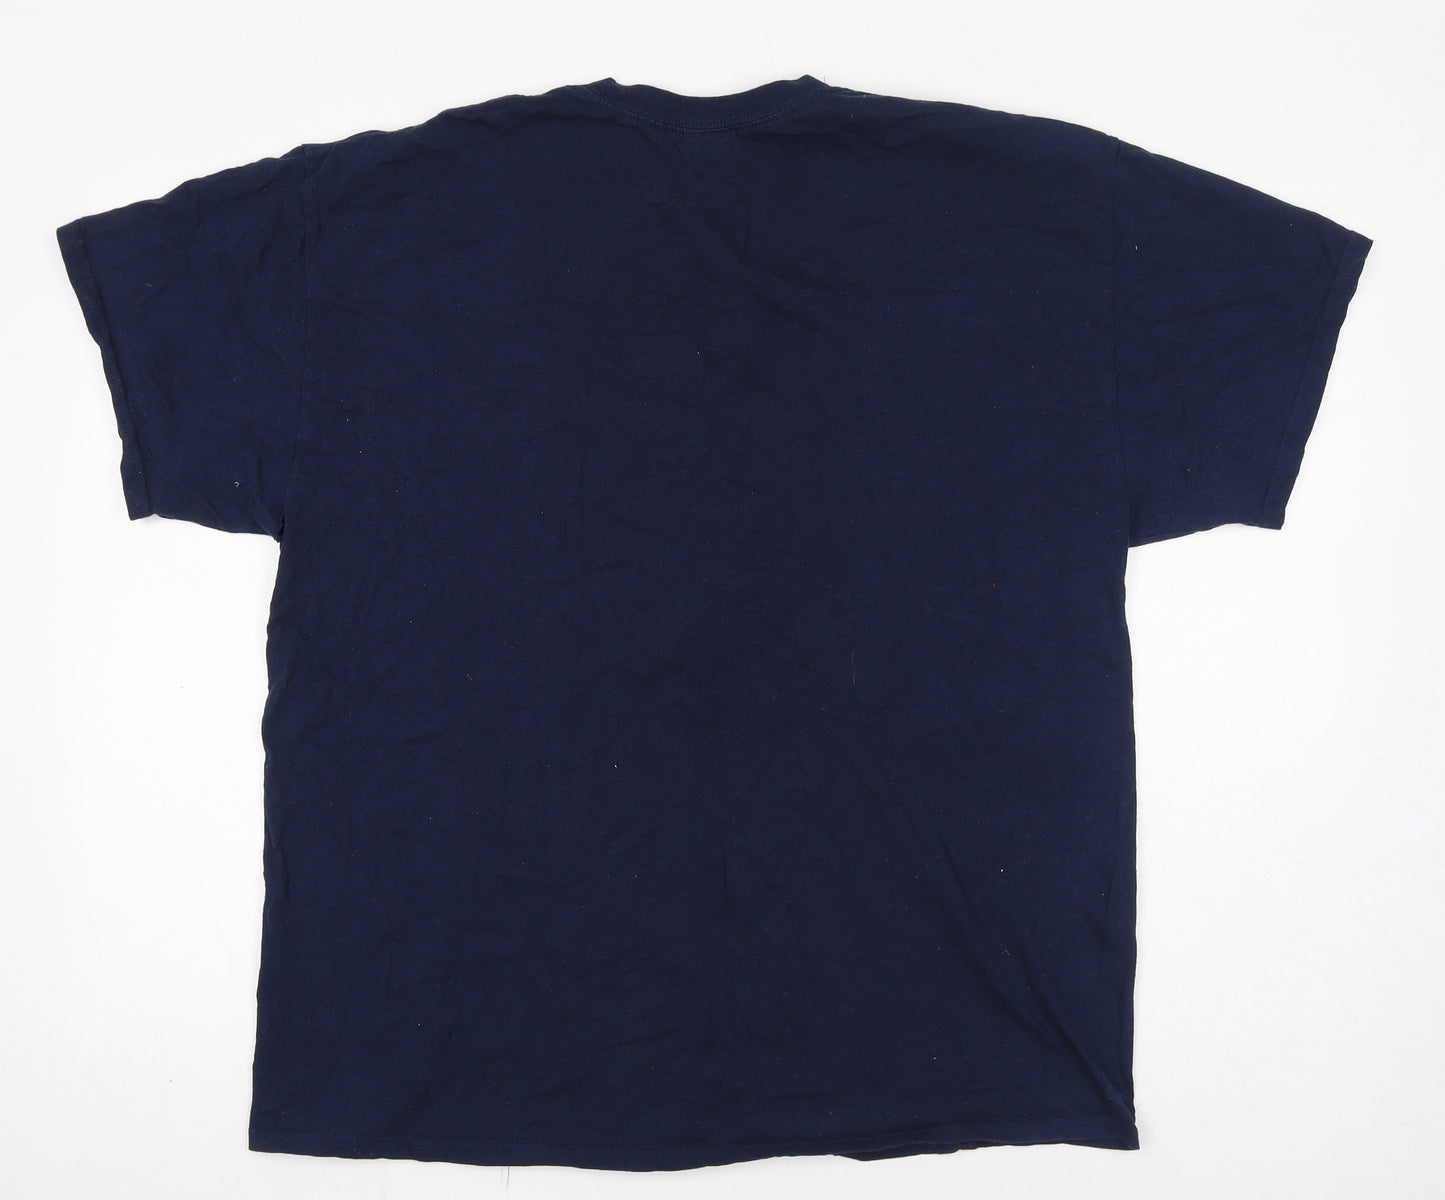 Gildan Mens Blue Cotton T-Shirt Size XL Crew Neck - Beer So much more than a breakfast drink